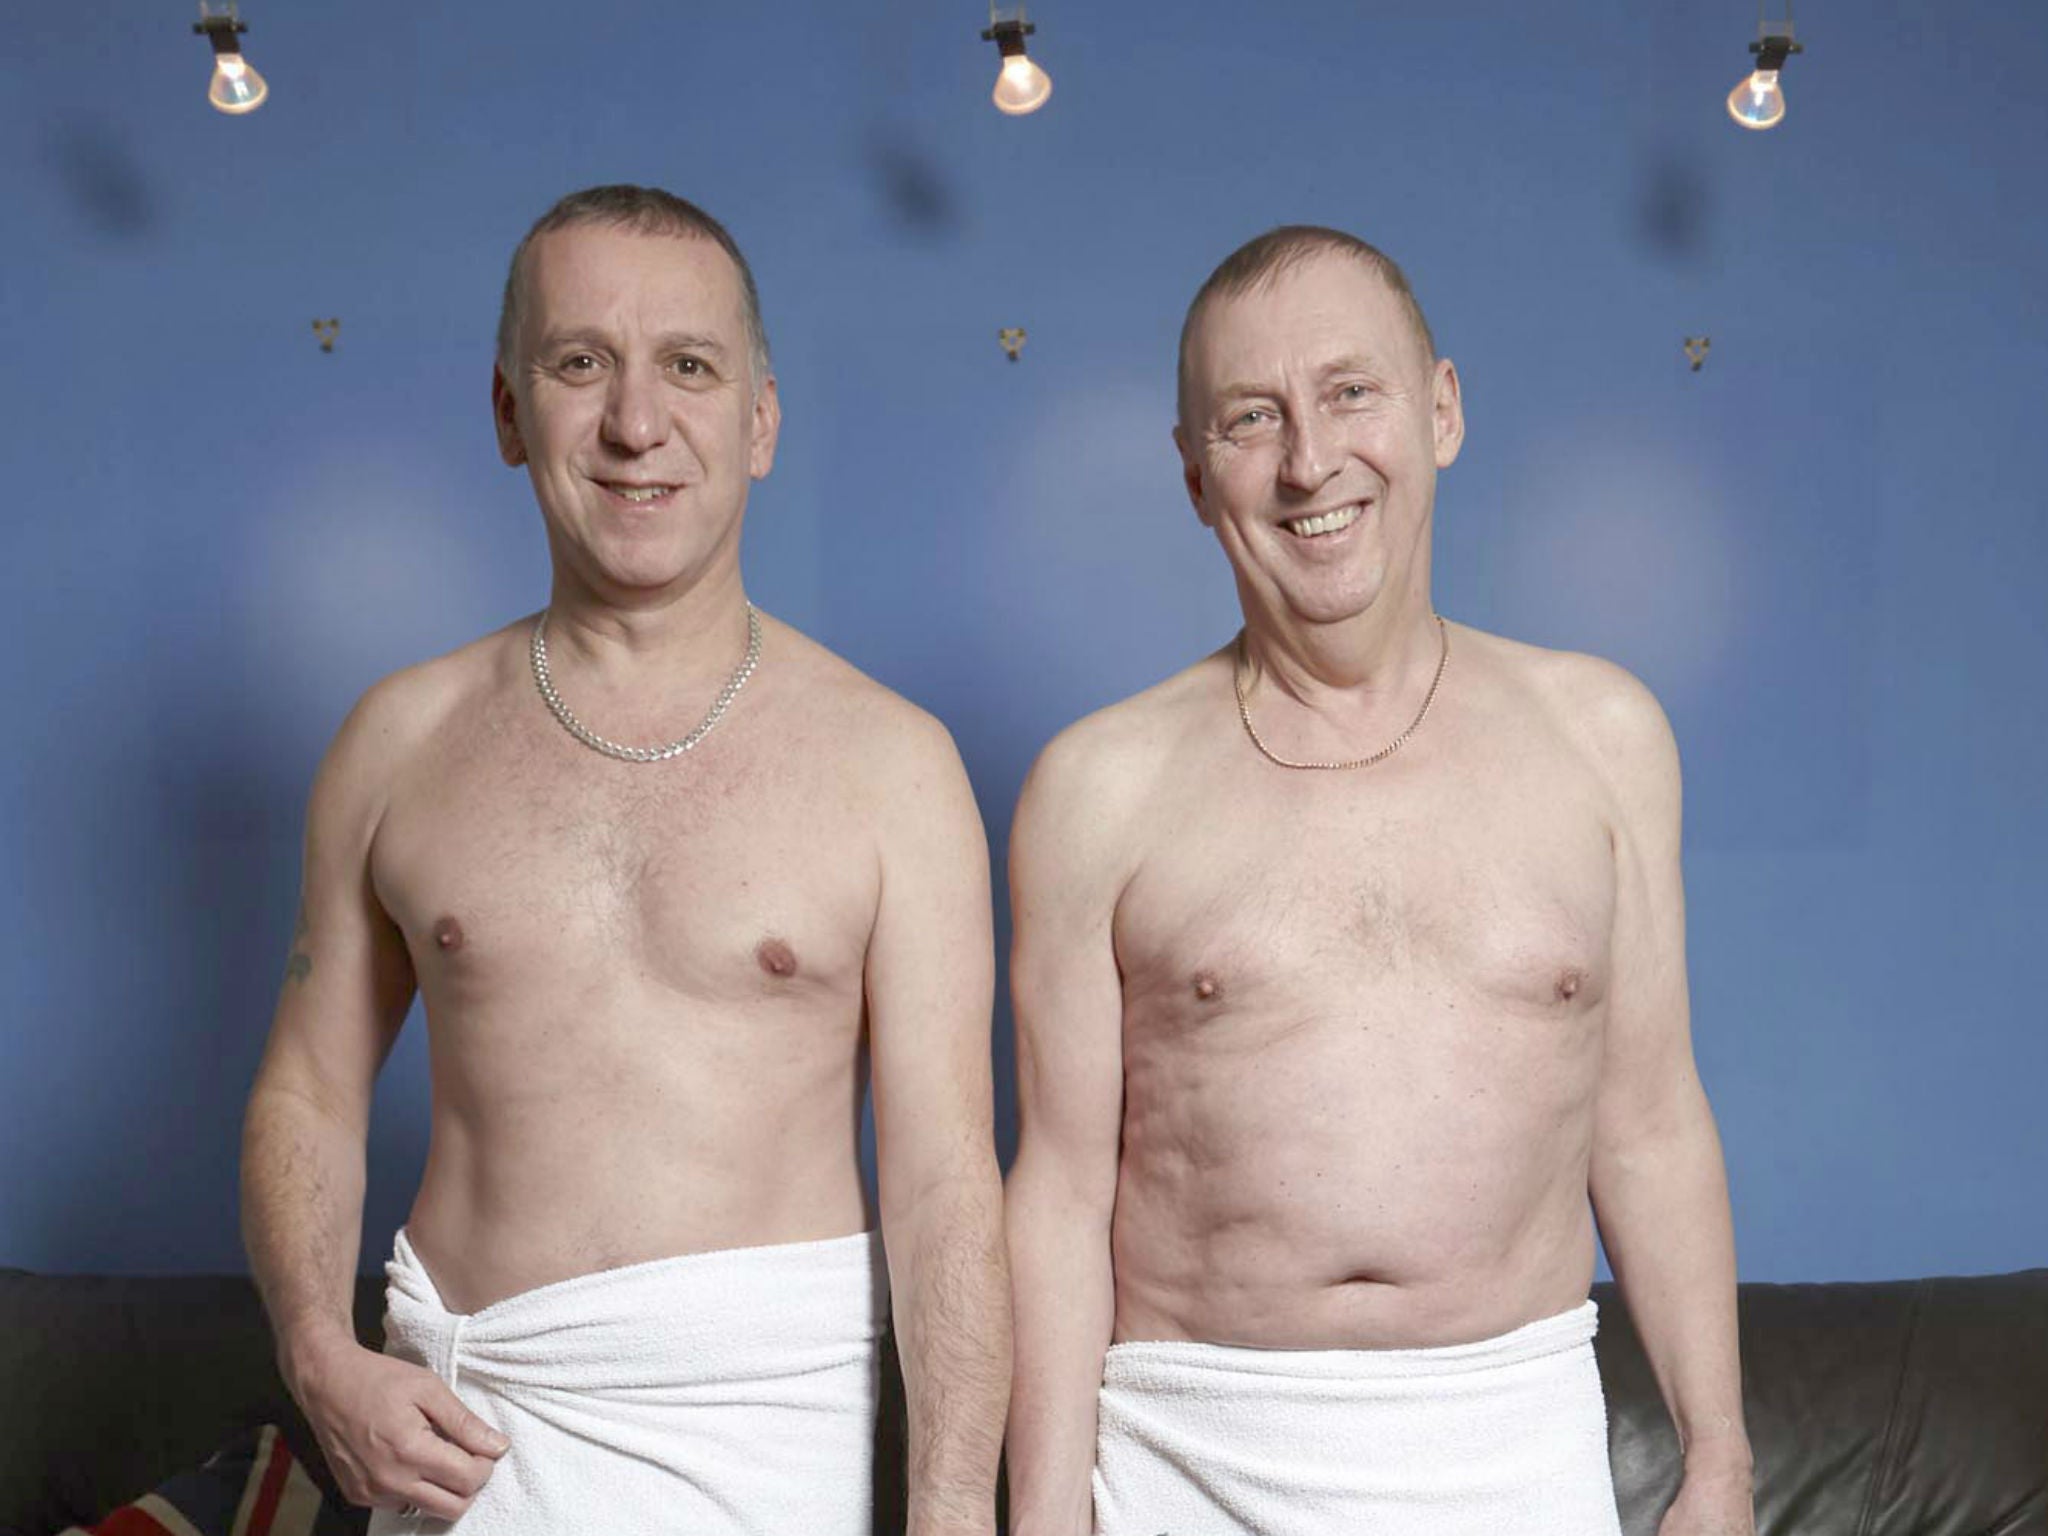 Secrets Of The Sauna Channel Documentary Takes Viewers Inside A Gay